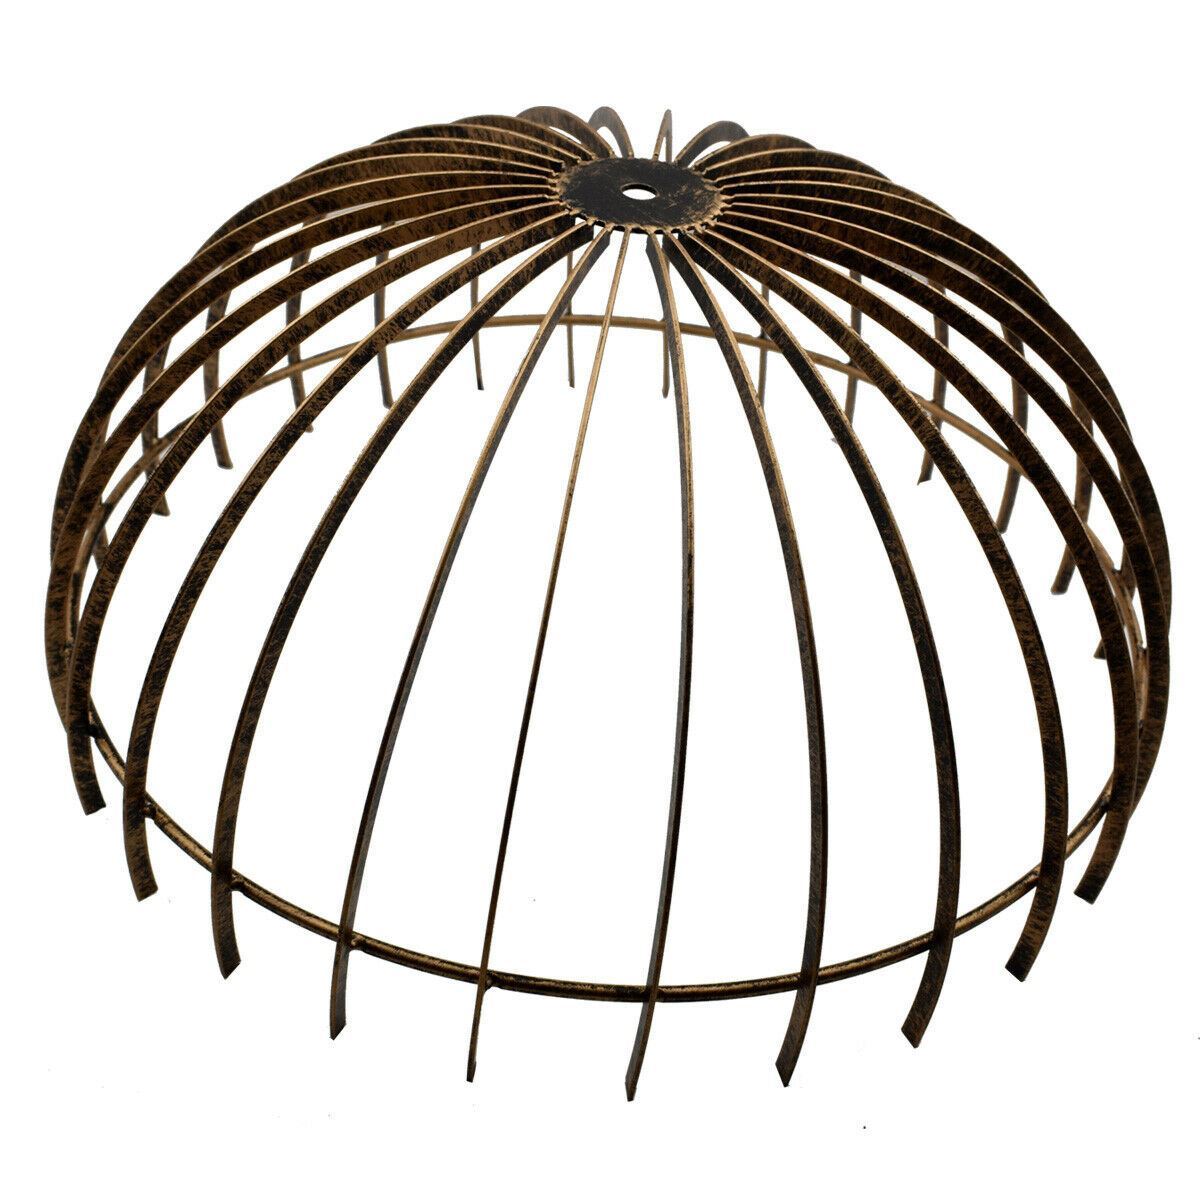 Industrial Retro Bird cage Light Shade Hanging Ceiling Light with Chain~2101